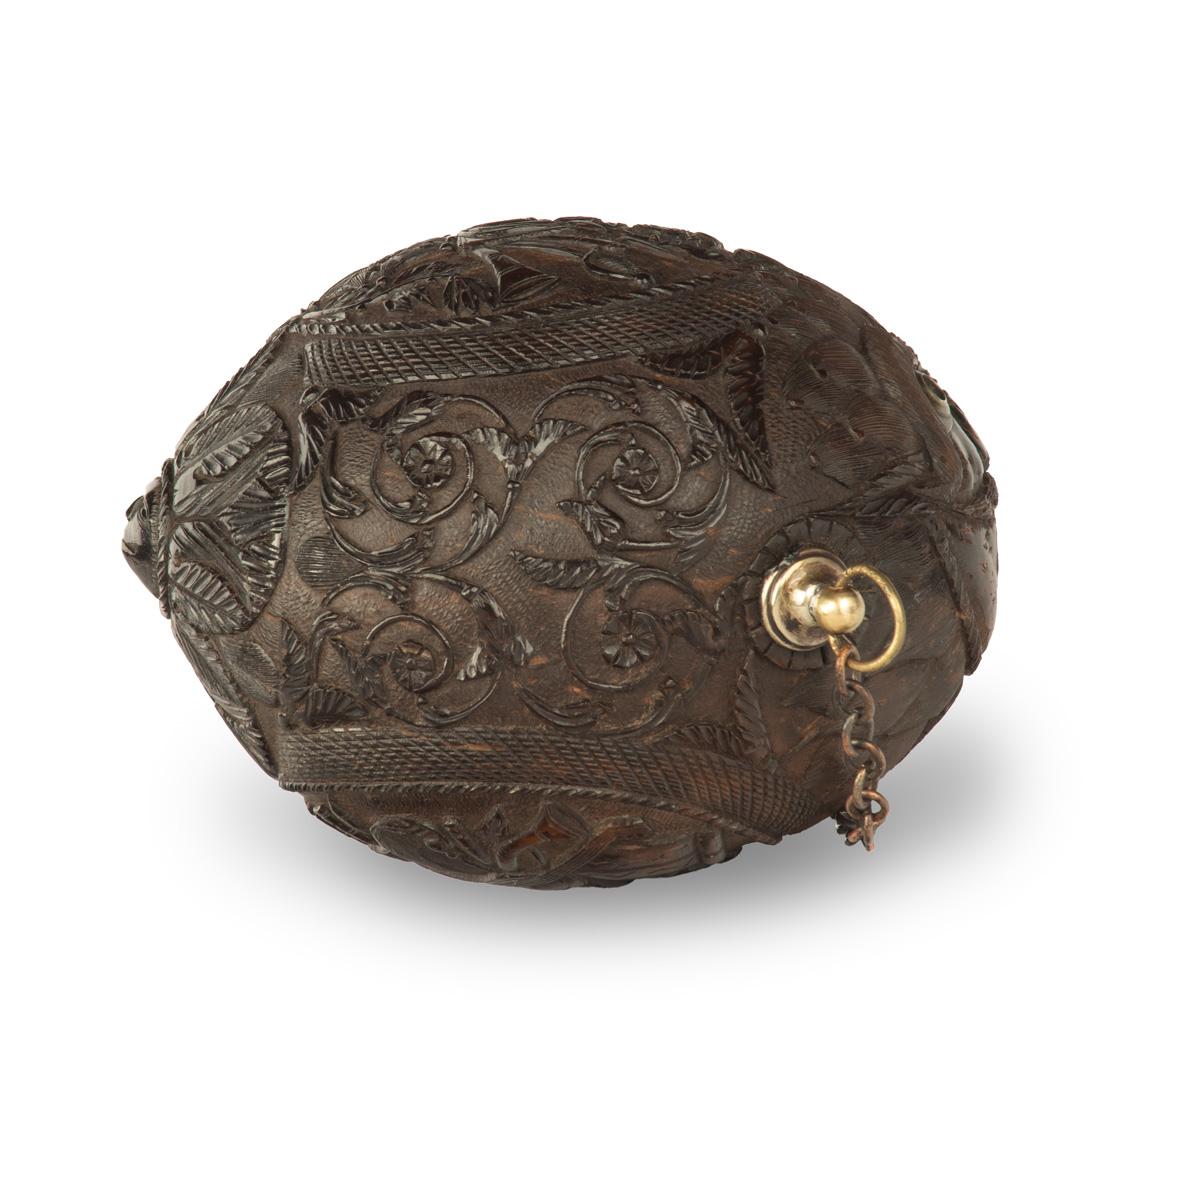 A sailor’s carved coconut Bugbear powder flask.  This carved coconut is carved with two ovals, one showing a military panoply with standards, bayonets, swords and bugles all above a five-pointed Maltese cross, the other with a musical trophy.  The